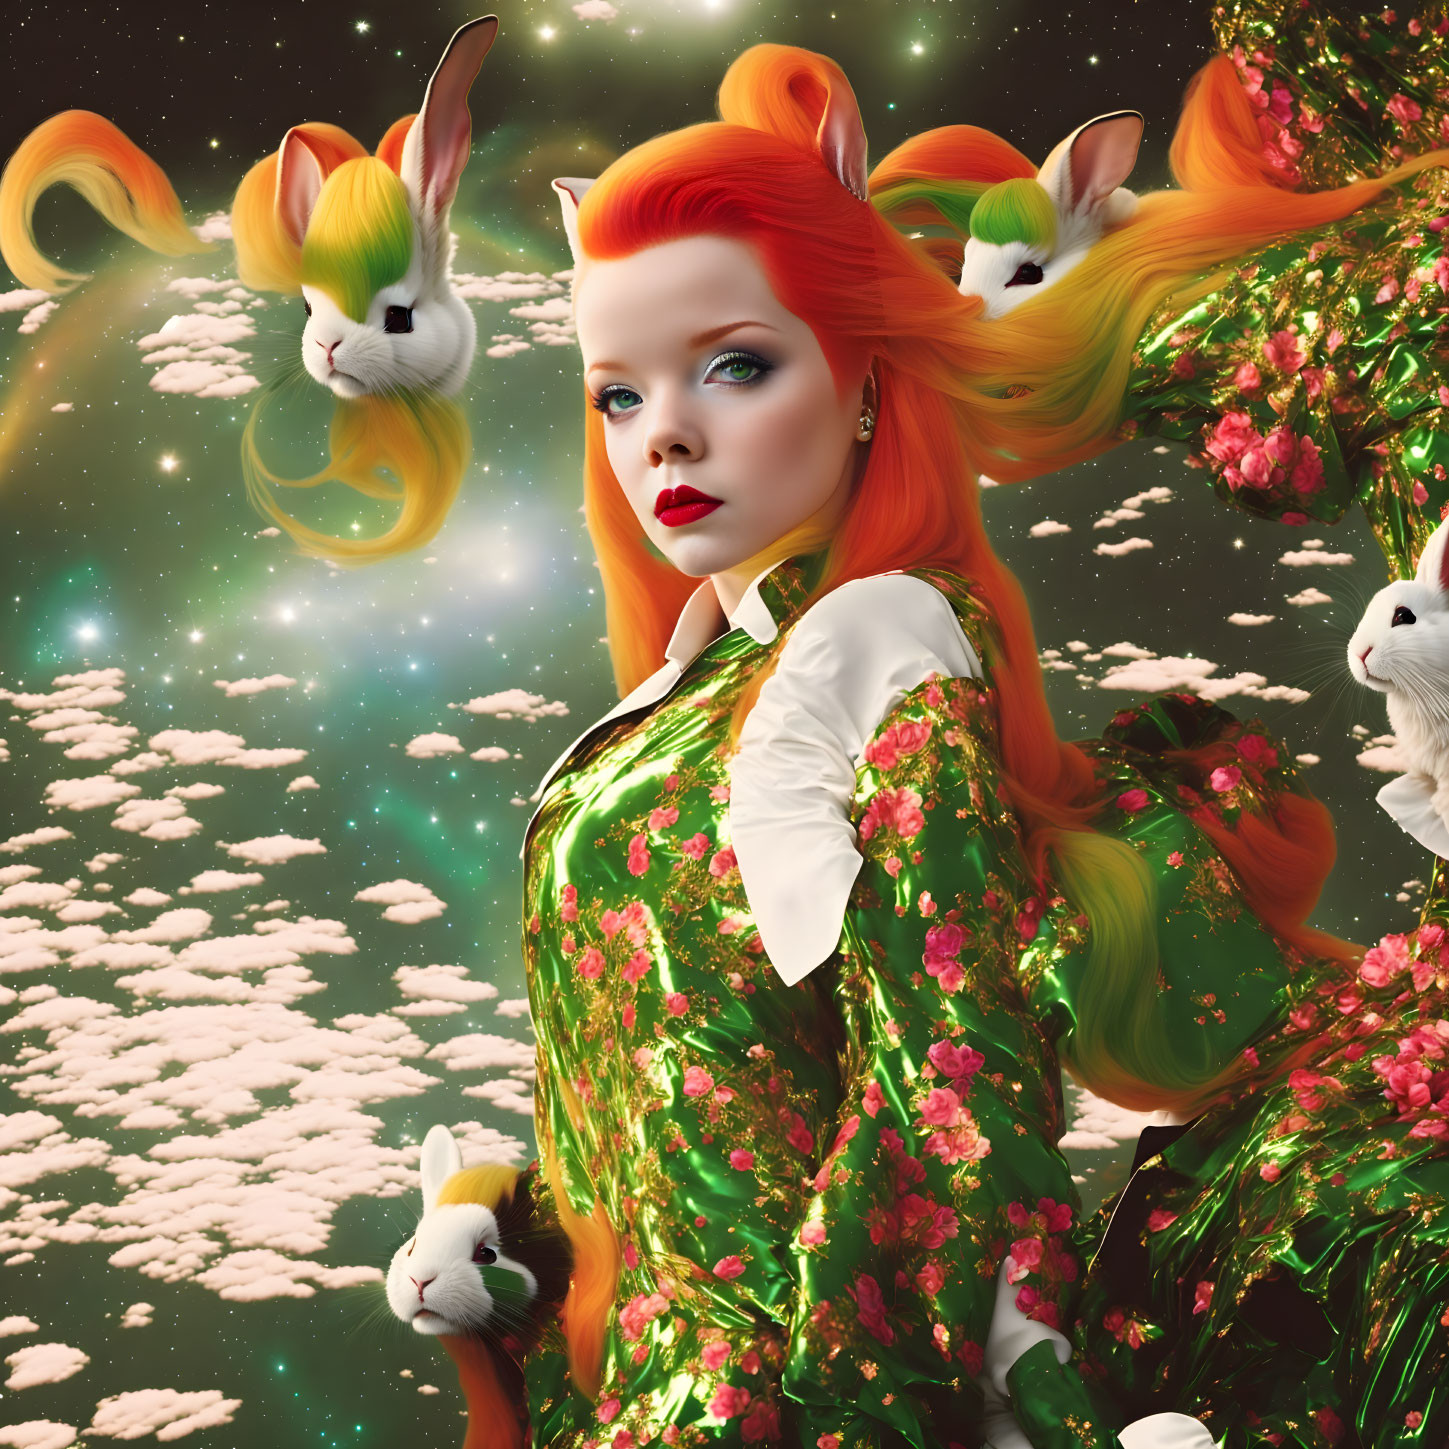 Surreal portrait: red-haired woman, floating white rabbits, cosmic background.